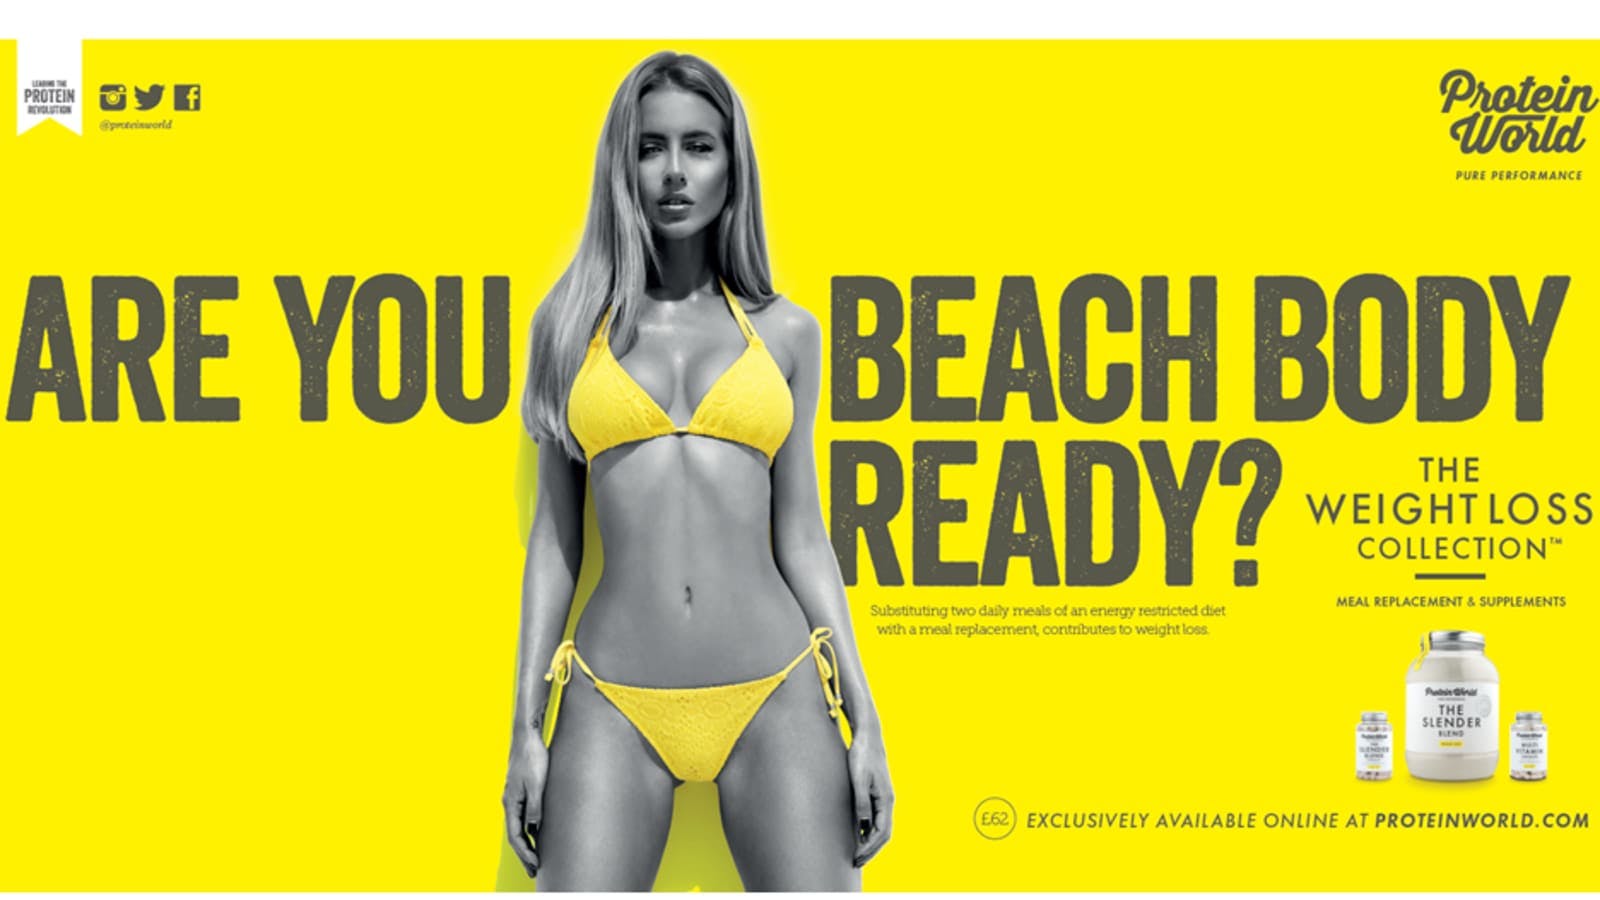 An advertisement of a skinny blonde woman in a yellow bikini, along with the text 'Are you beach body ready?'